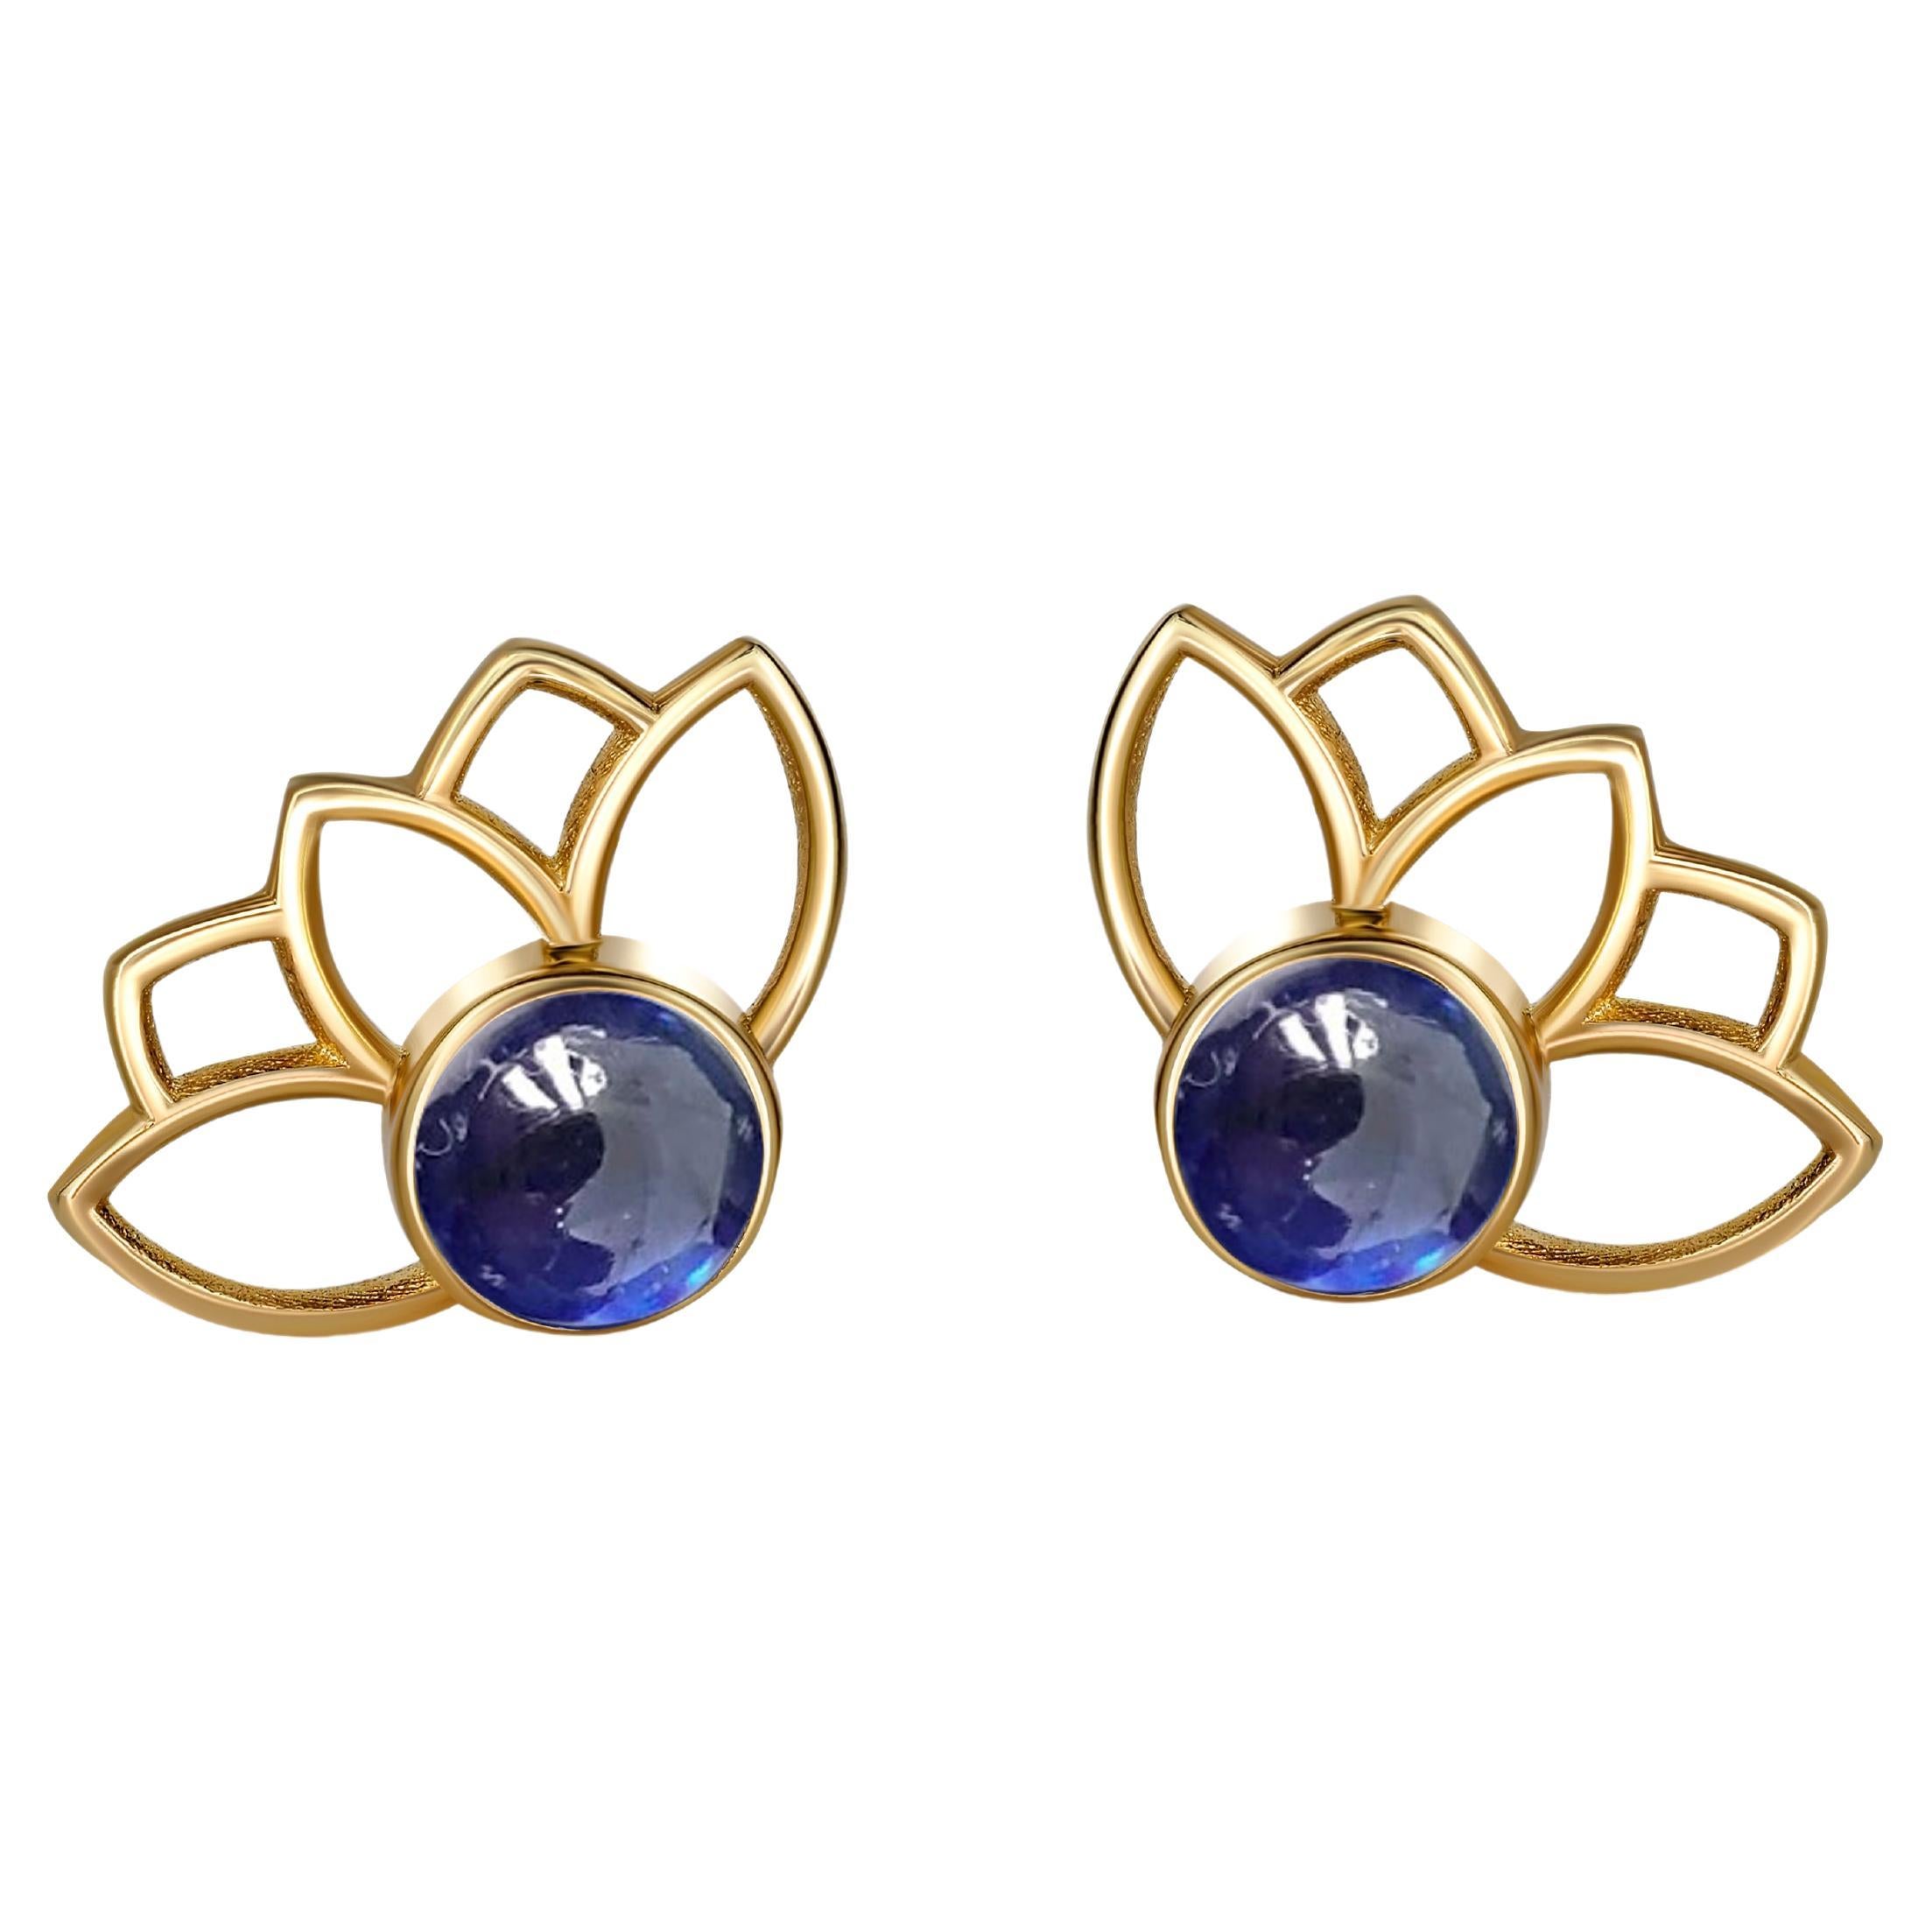 Lotus Earrings Studs with Sapphires in 14k Gold, Blue Sapphire Gold Earrings